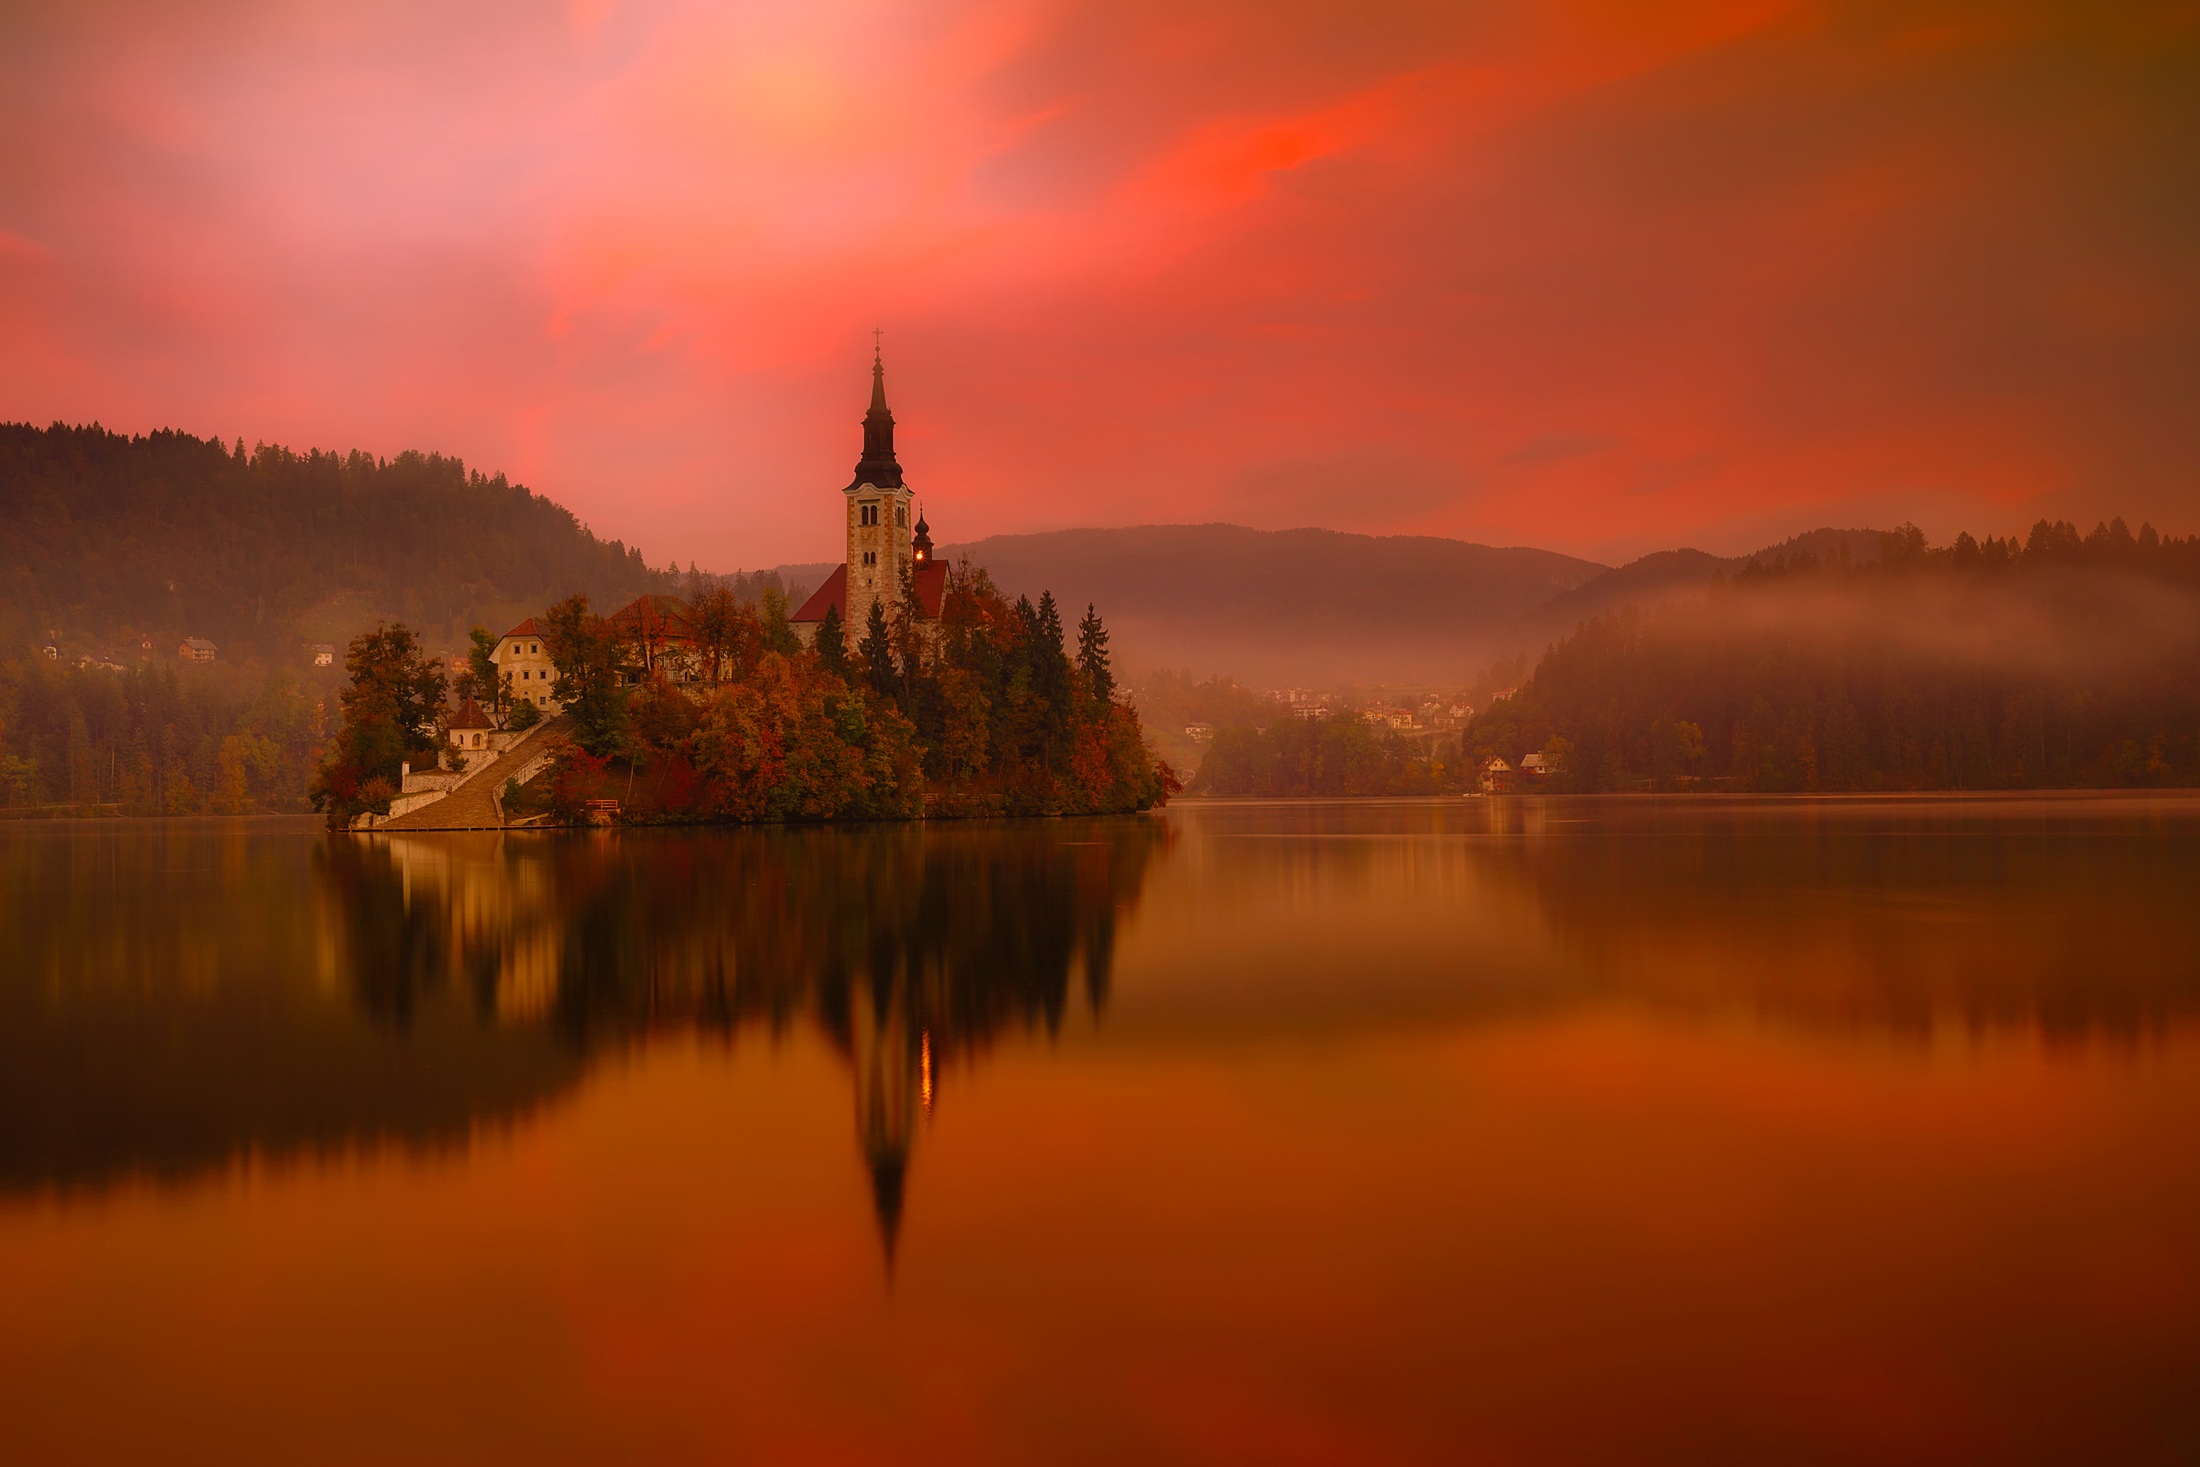 religious, assumption of mary church, lake bled, orange (color), reflection, slovenia, churches